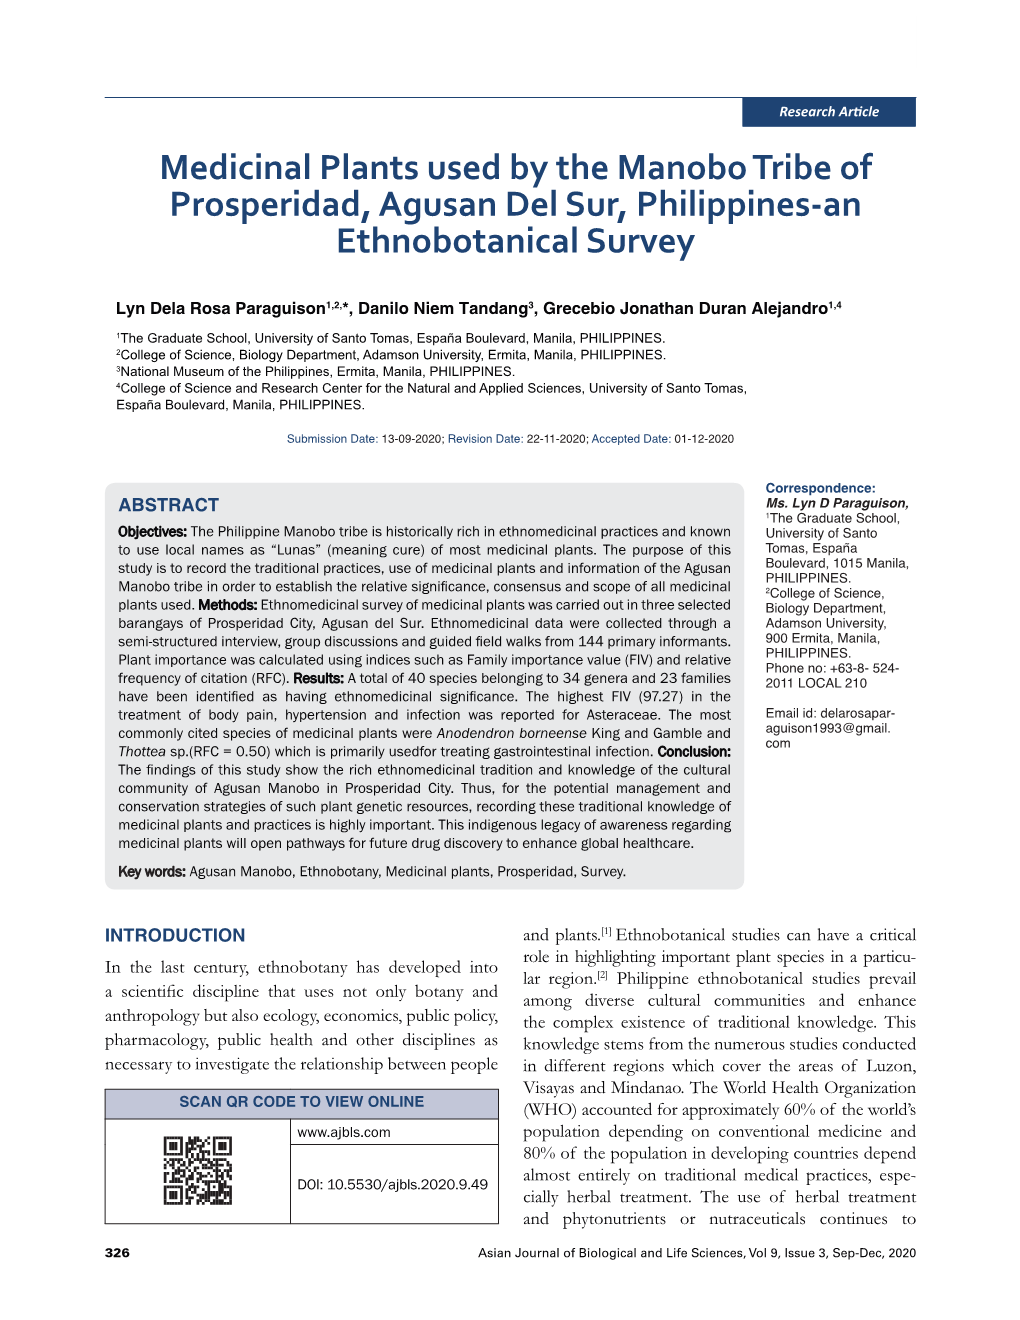 Medicinal Plants Used by the Manobo Tribe of Prosperidad, Agusan Del Sur, Philippines-An Ethnobotanical Survey